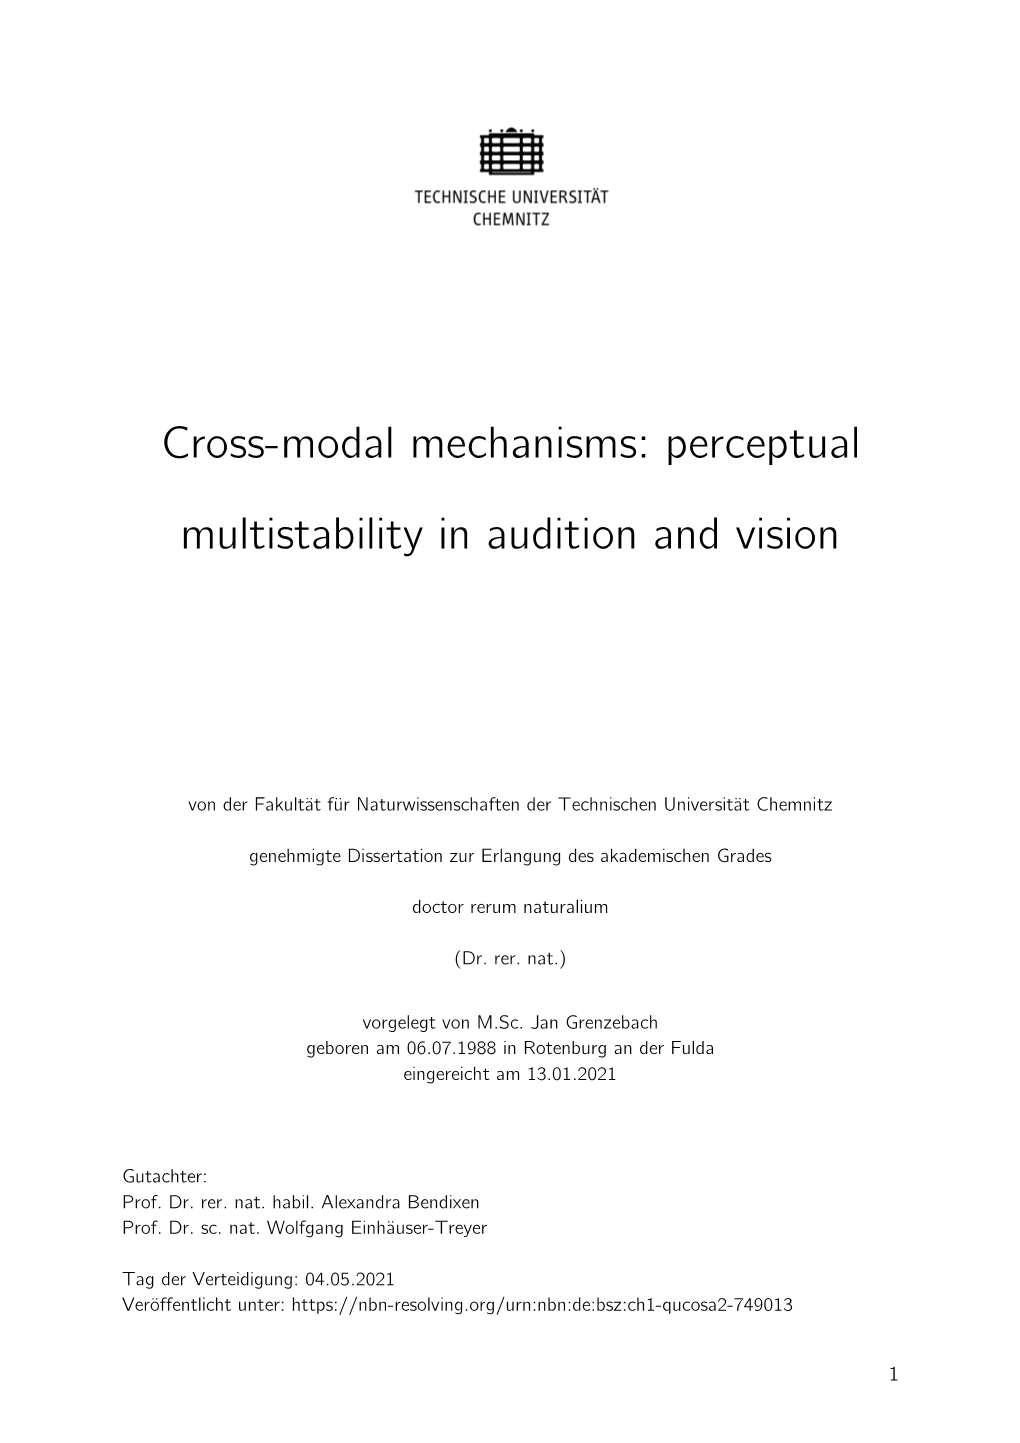 Cross-Modal Mechanisms: Perceptual Multistability in Audition and Vision